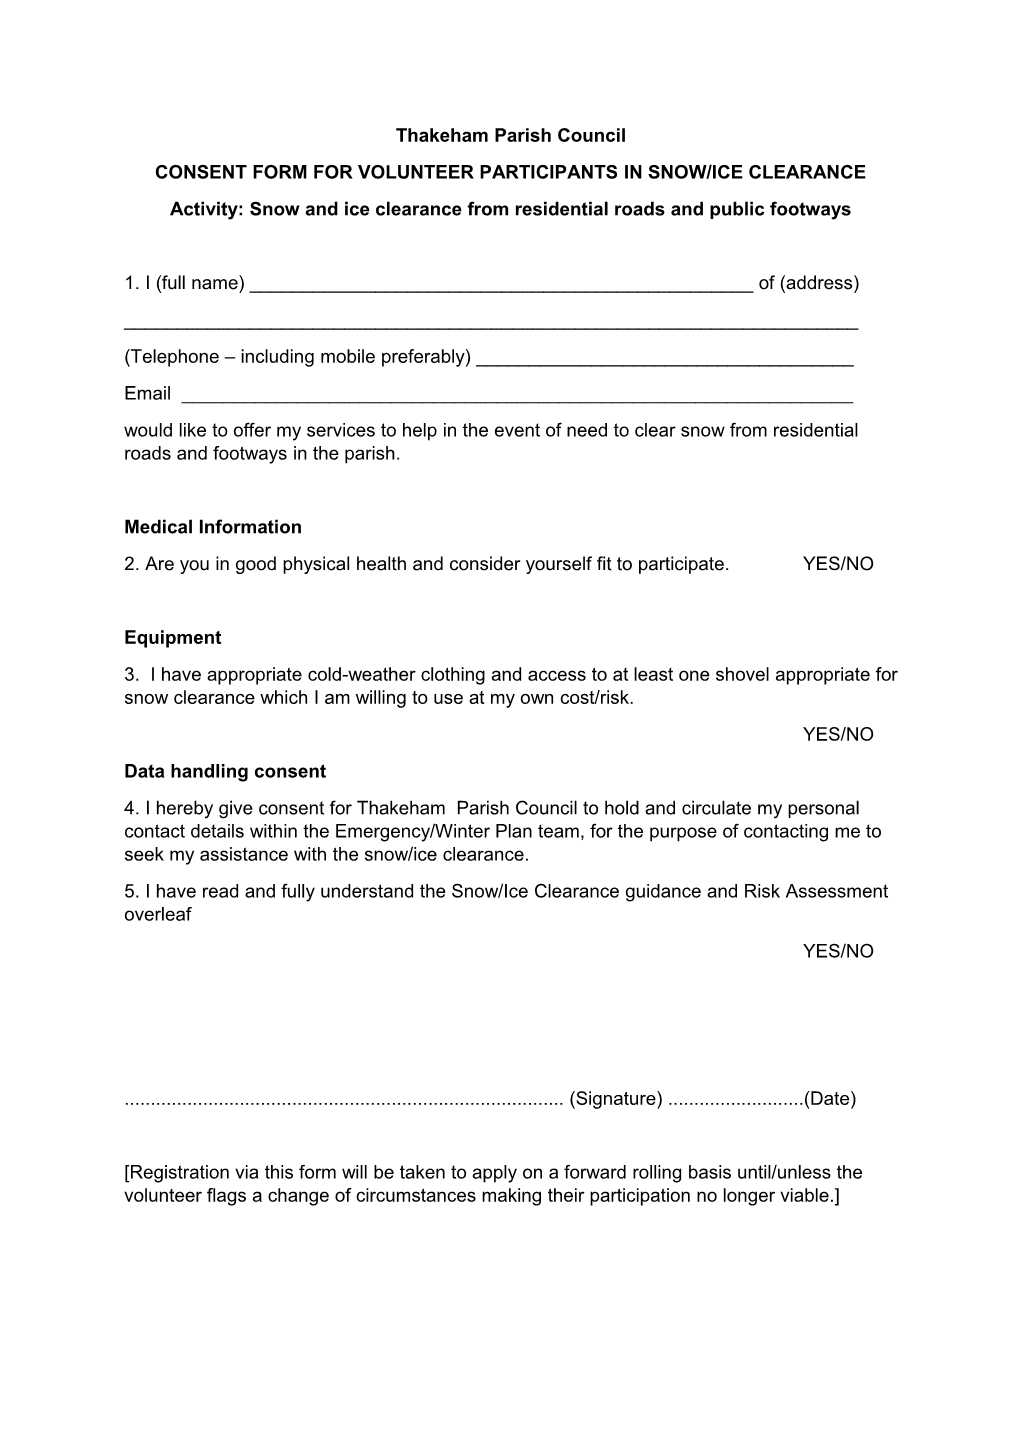 Consent Form for Volunteer Participants in Snow/Ice Clearance